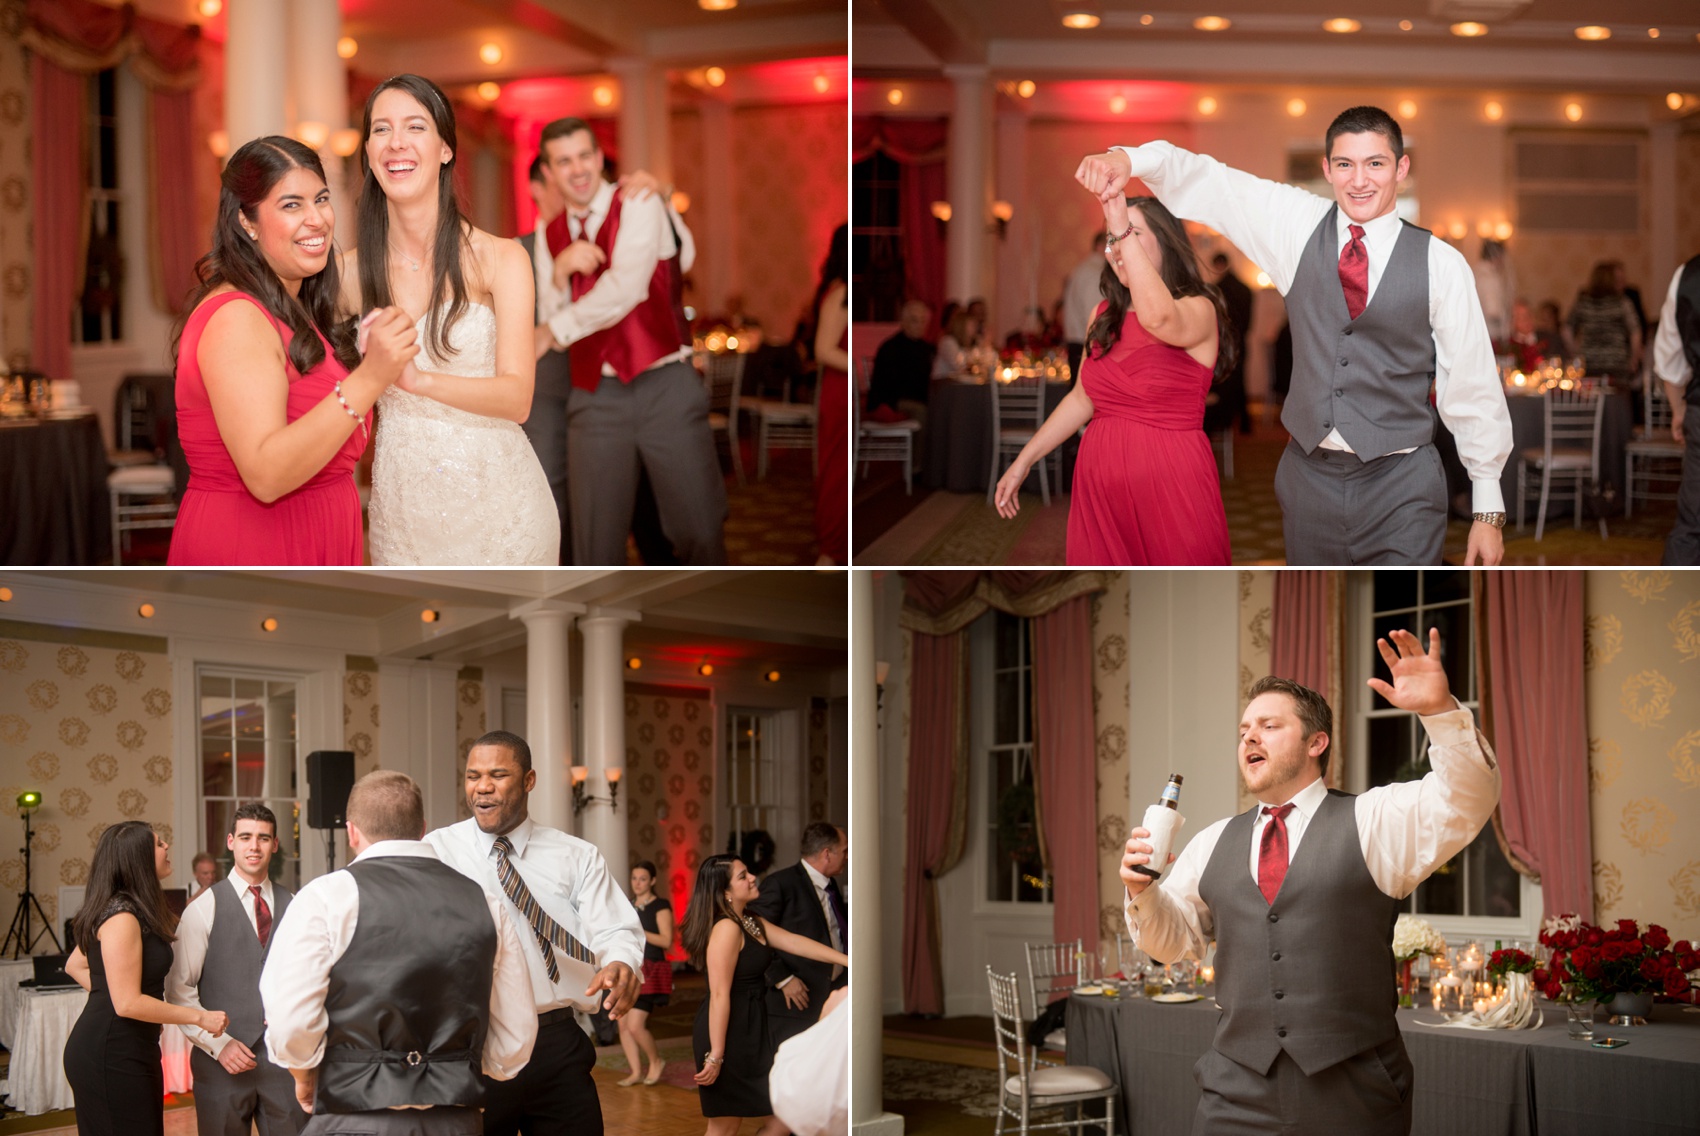 Omni Bedford Springs Resort wedding photos by Mikkel Paige Photography. Christmas holiday winter wonderland day with red and white color palette. Dancing photos!